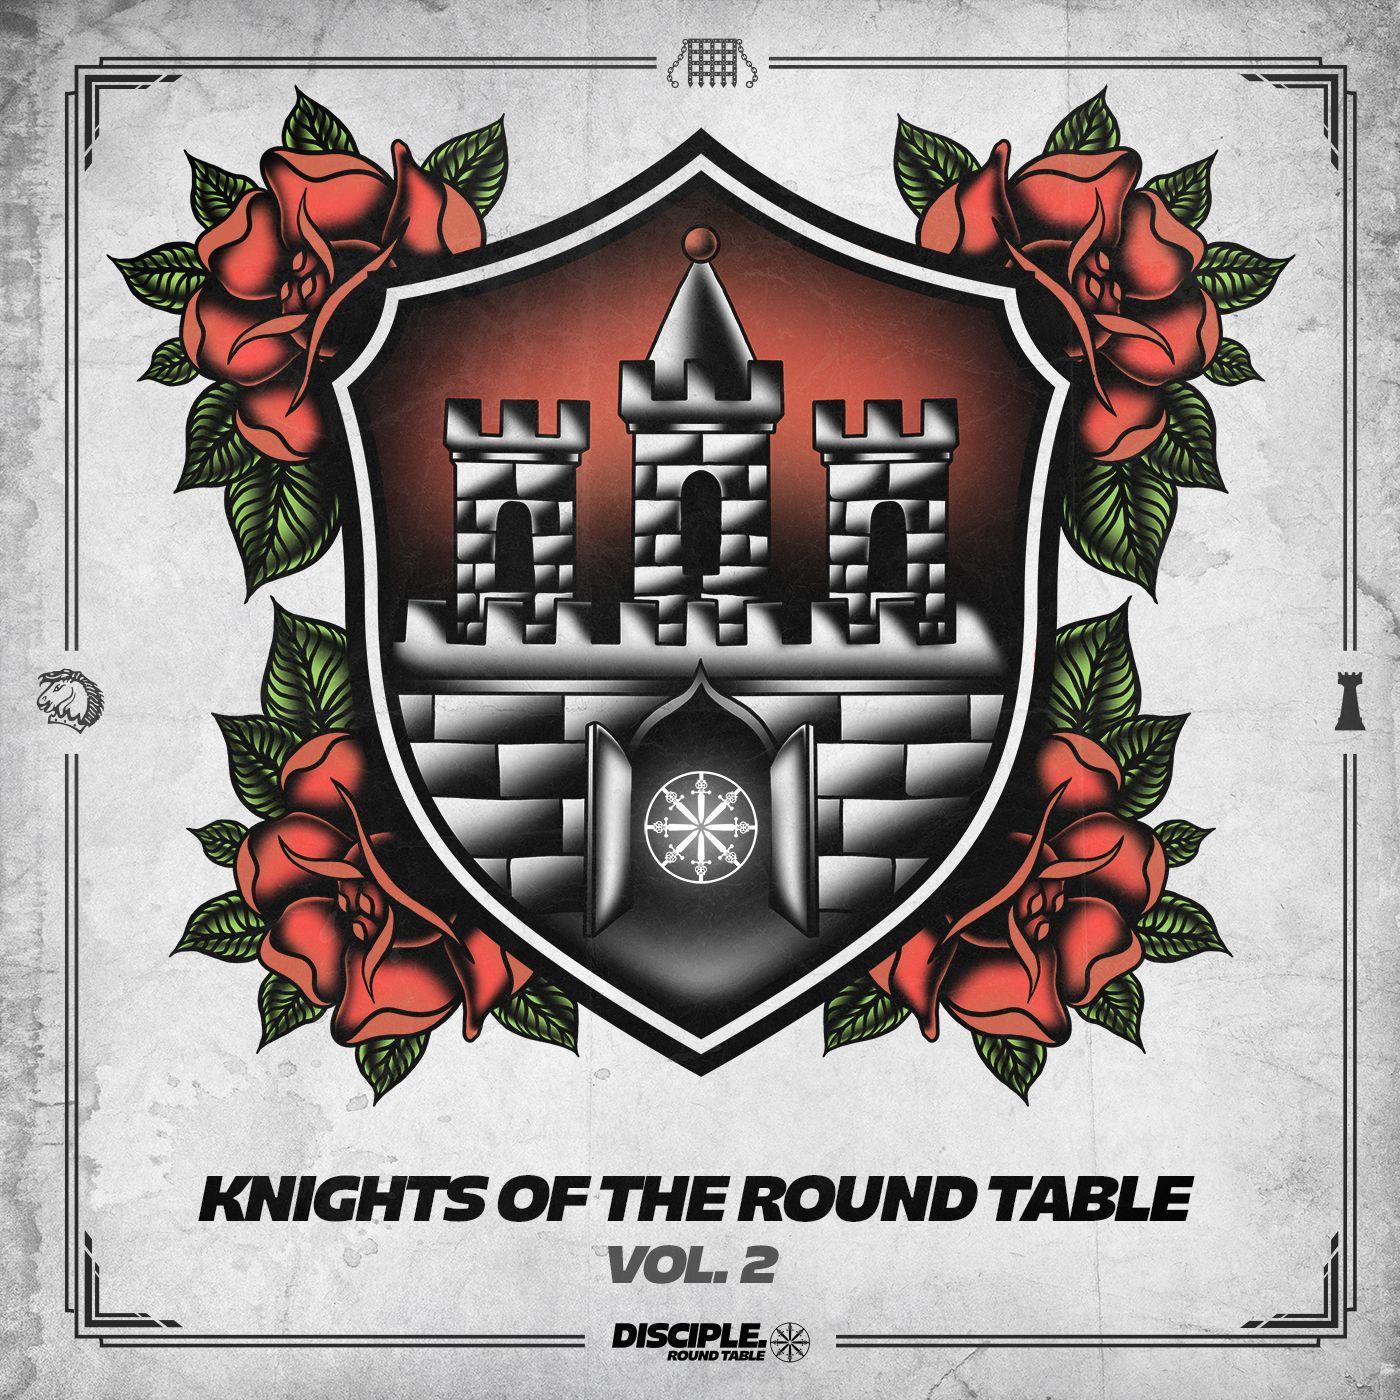 Disciple Dubstep Logo - Disciple 'Knights of the Round Table: Vol. 2' is Absolute Mayhem